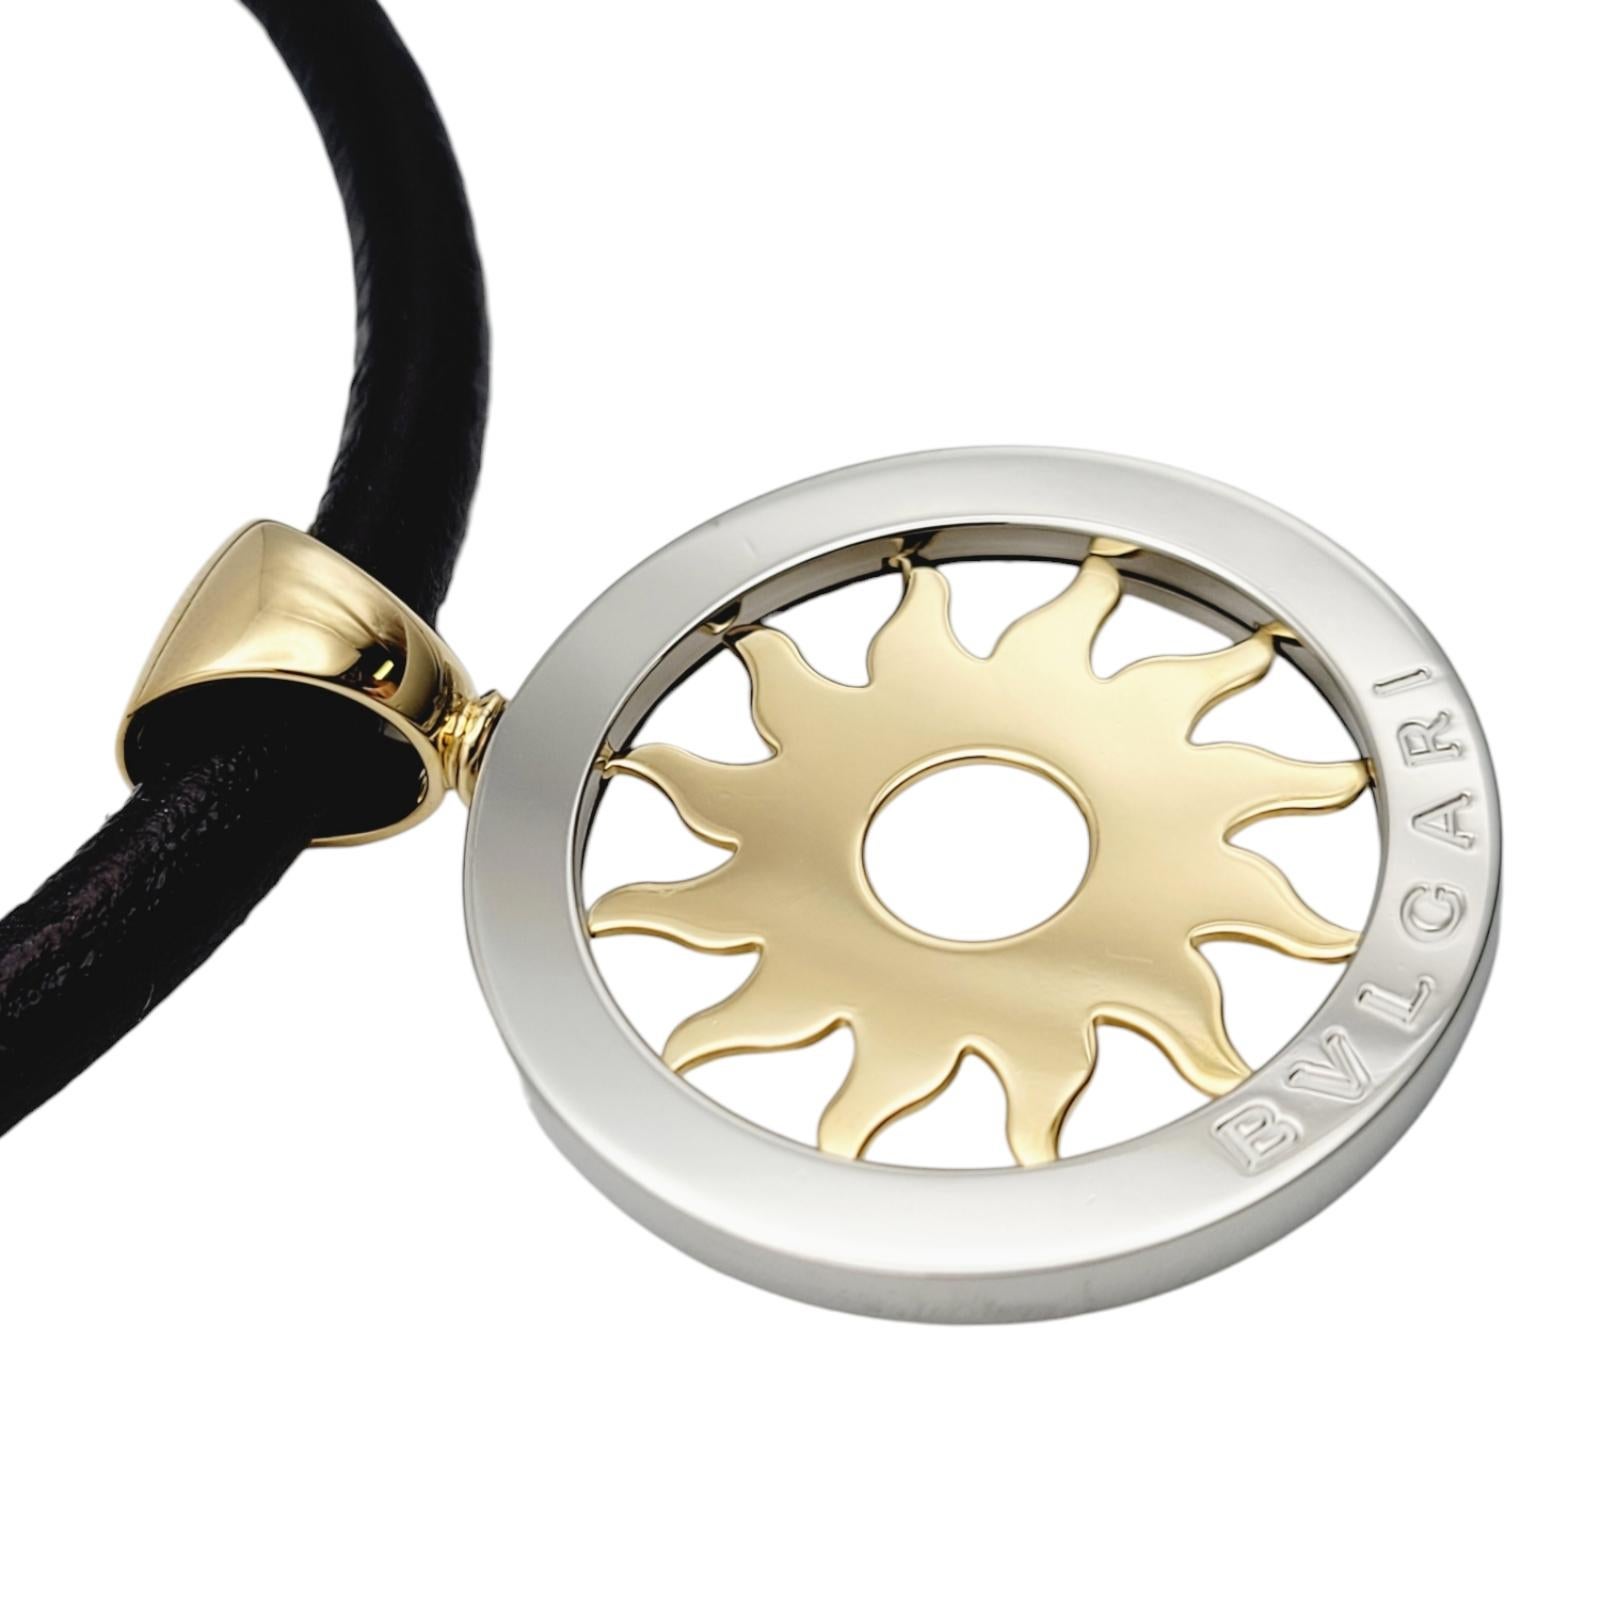 Contemporary Bulgari Tondo Sun Pendant Leather Necklace in 18k Yellow Gold & Stainless Steel